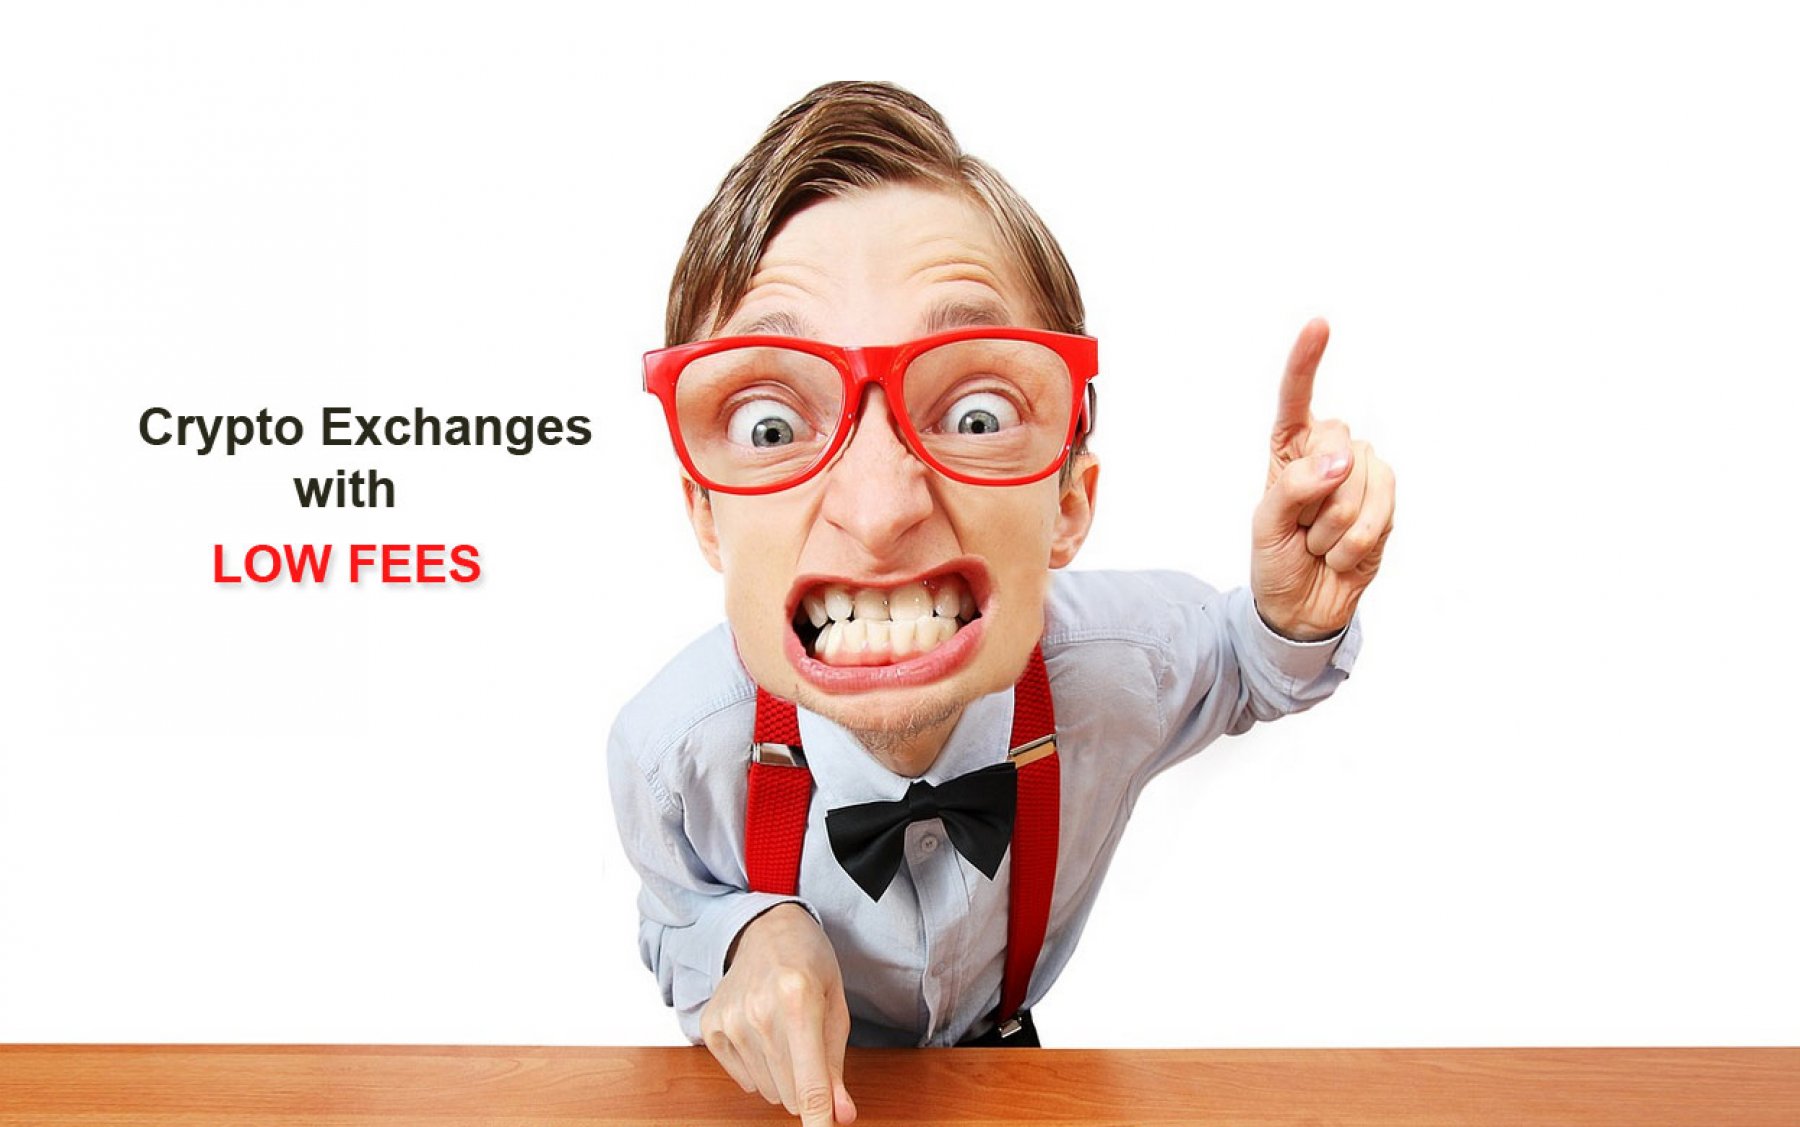 Crypto exchanges with low fees